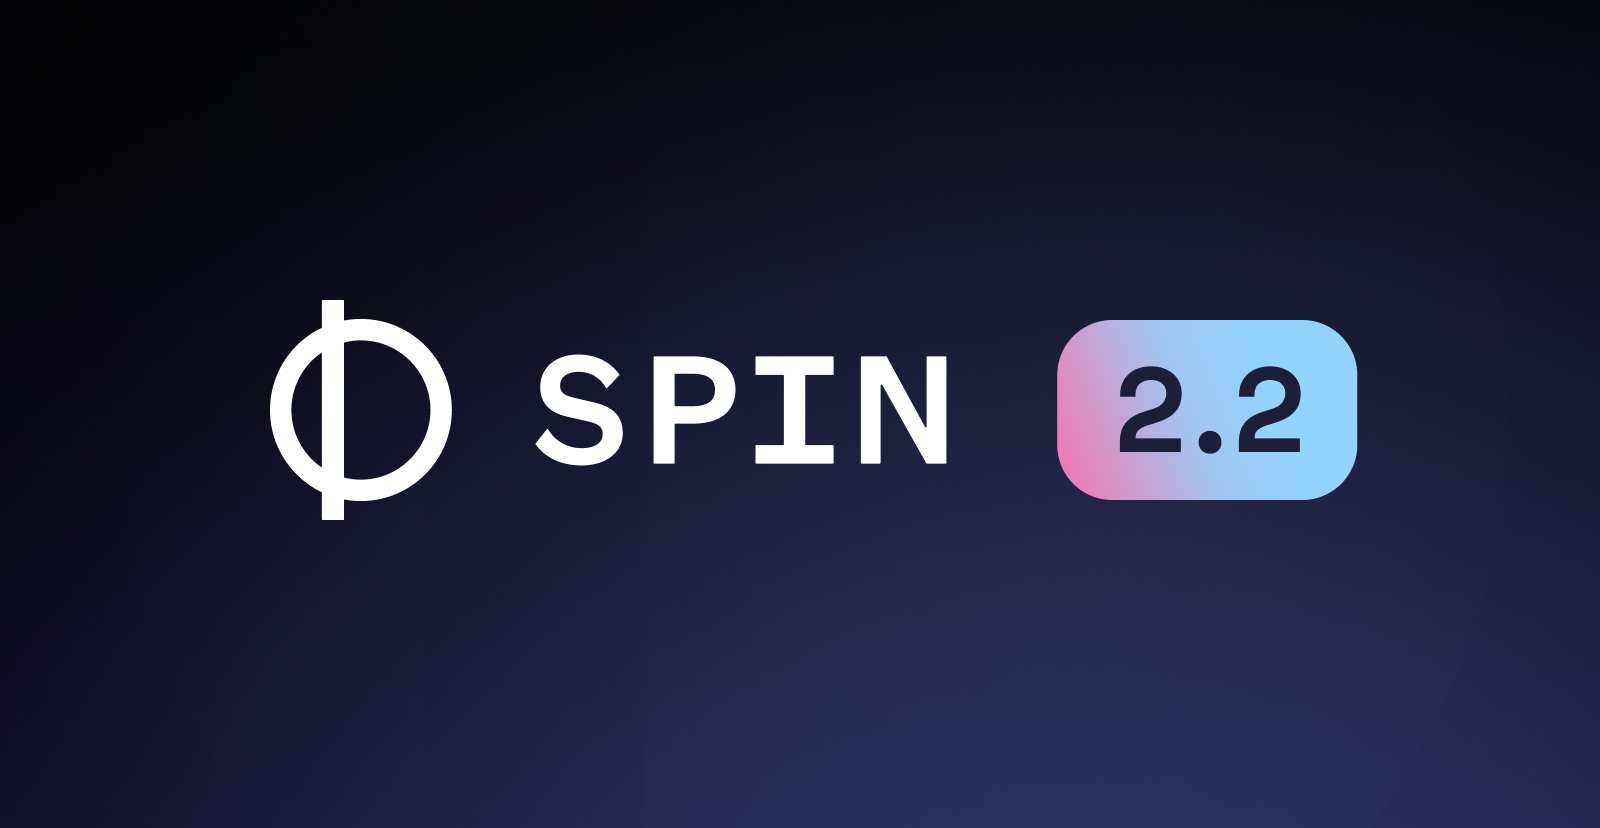 Announcing Spin 2.2